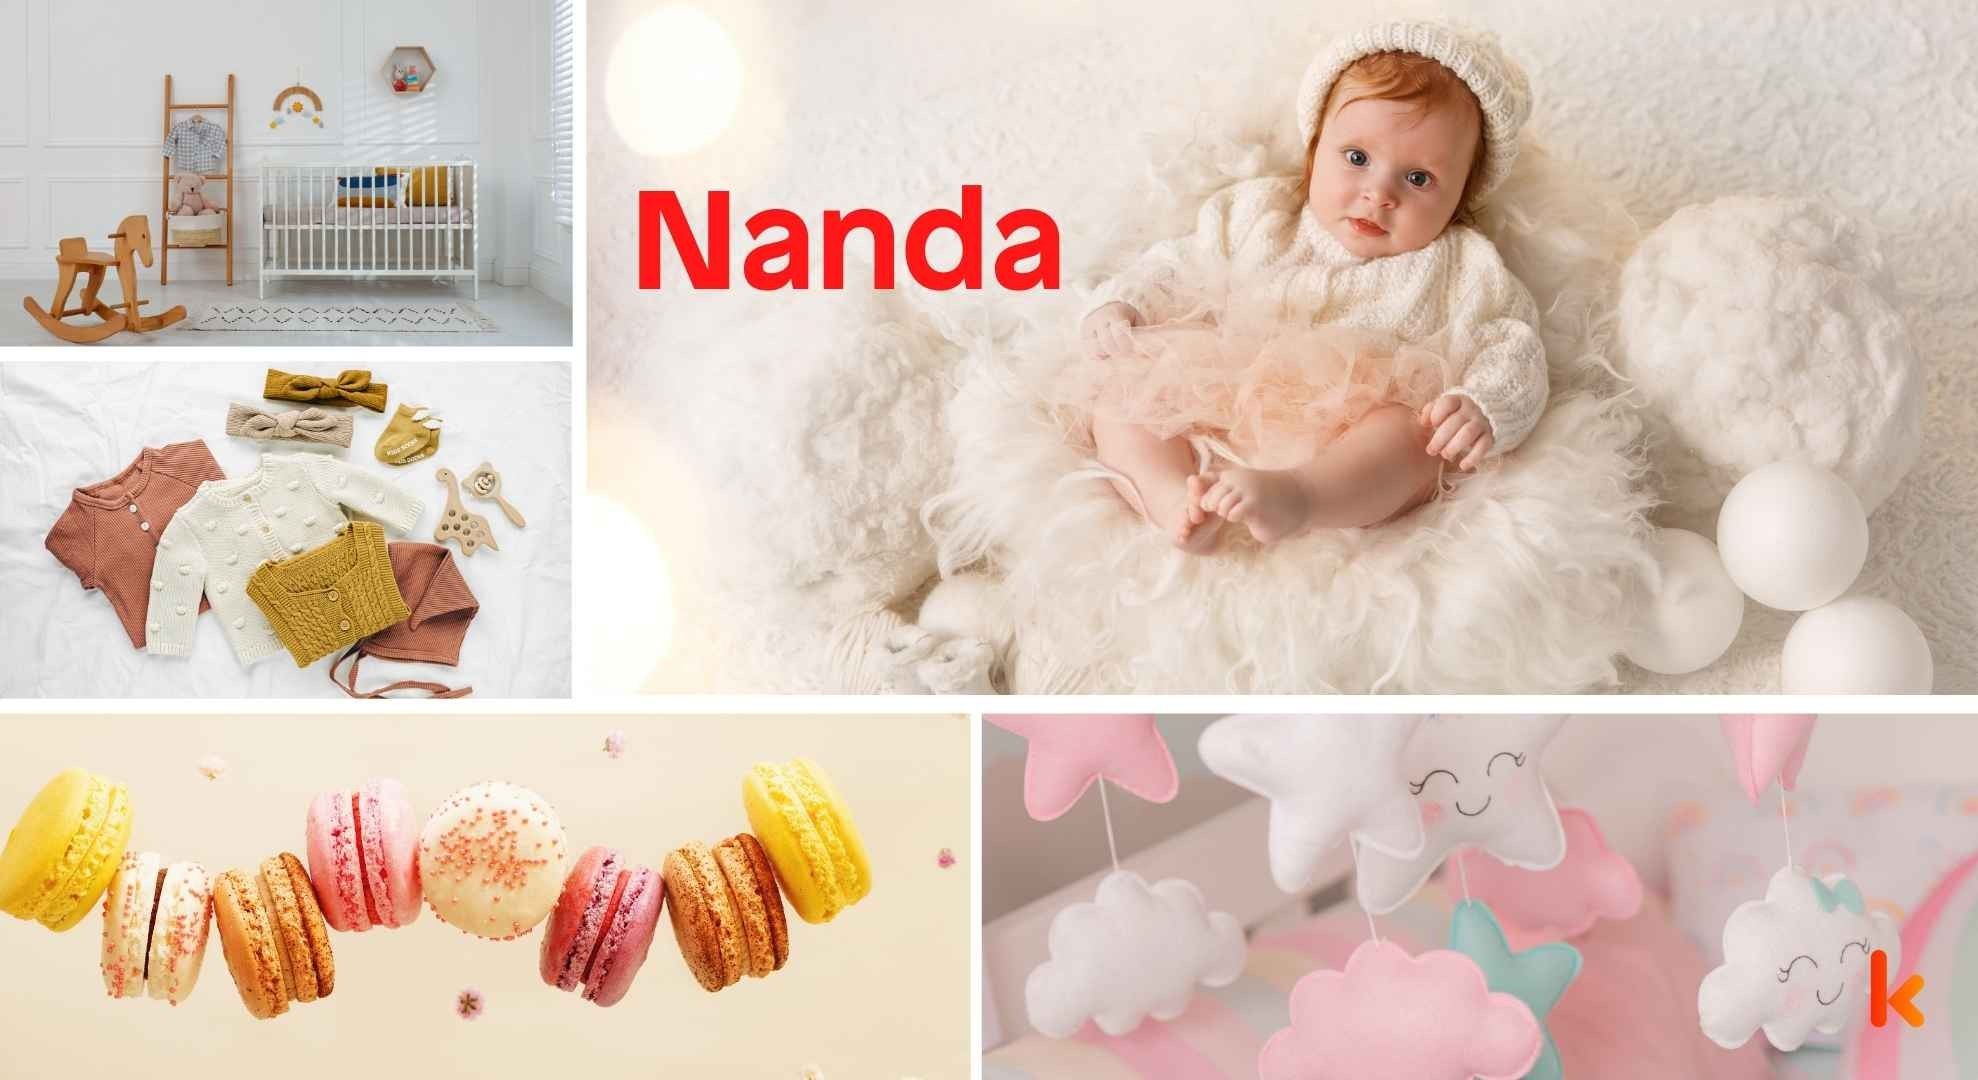 Meaning of the name Nanda